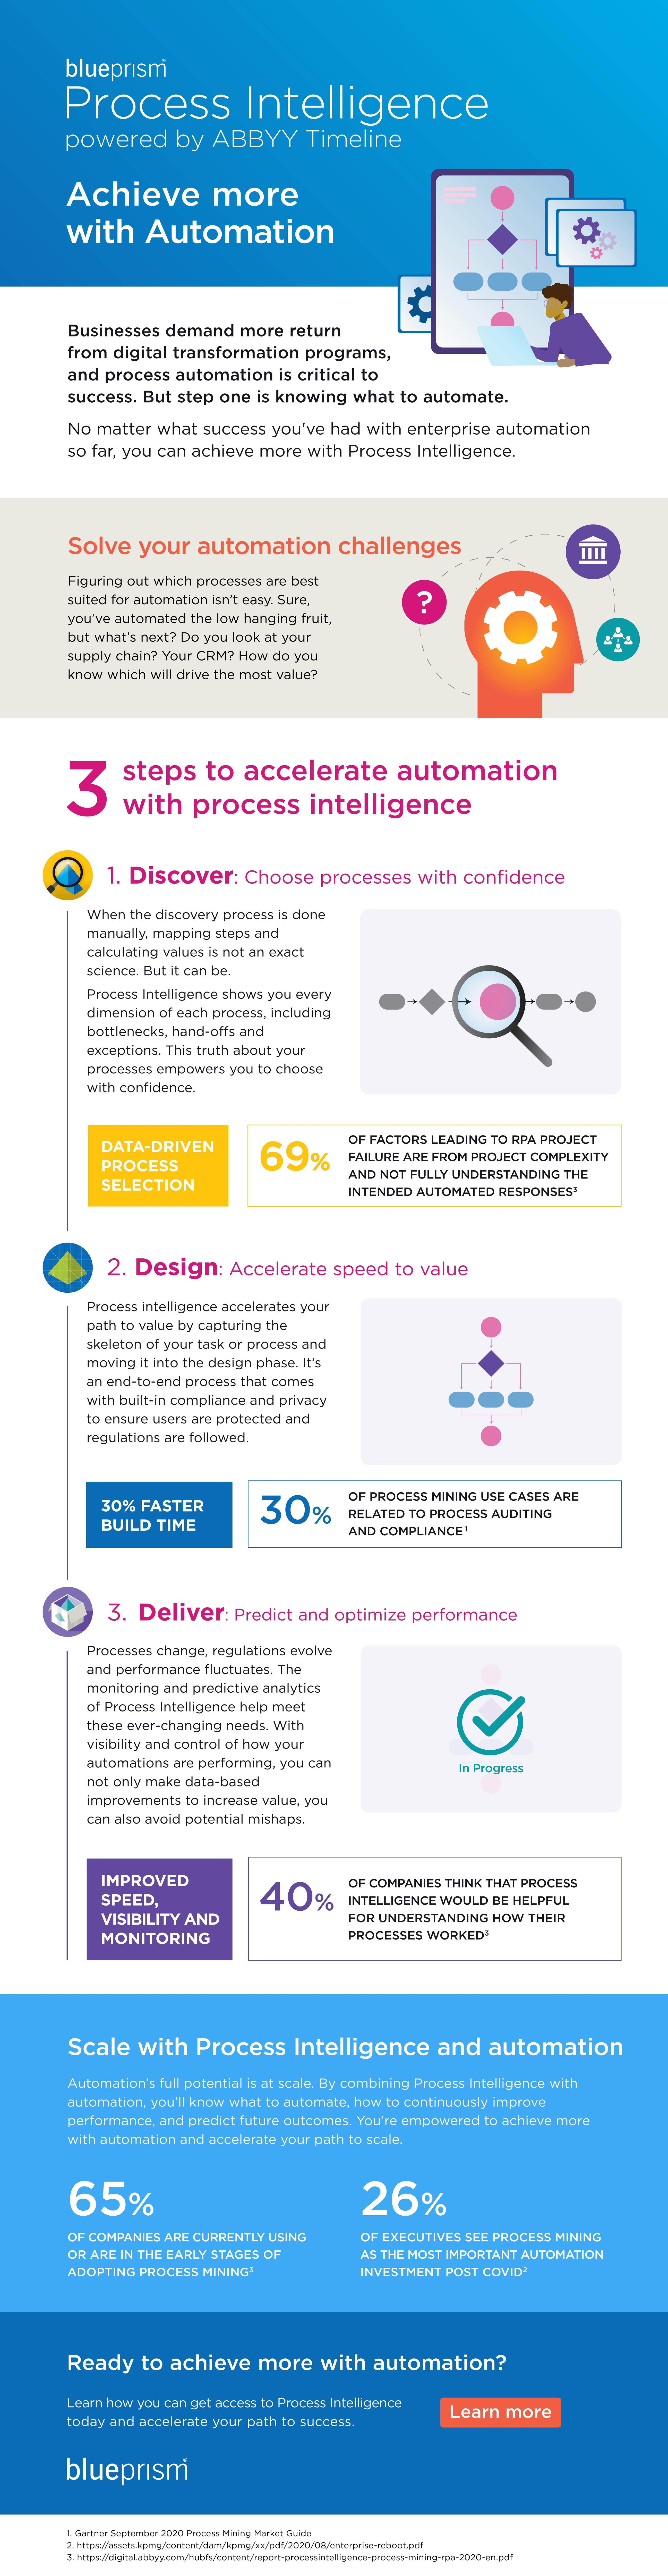 3 Steps to Accelerate Automation with Process Intelligence Infographic